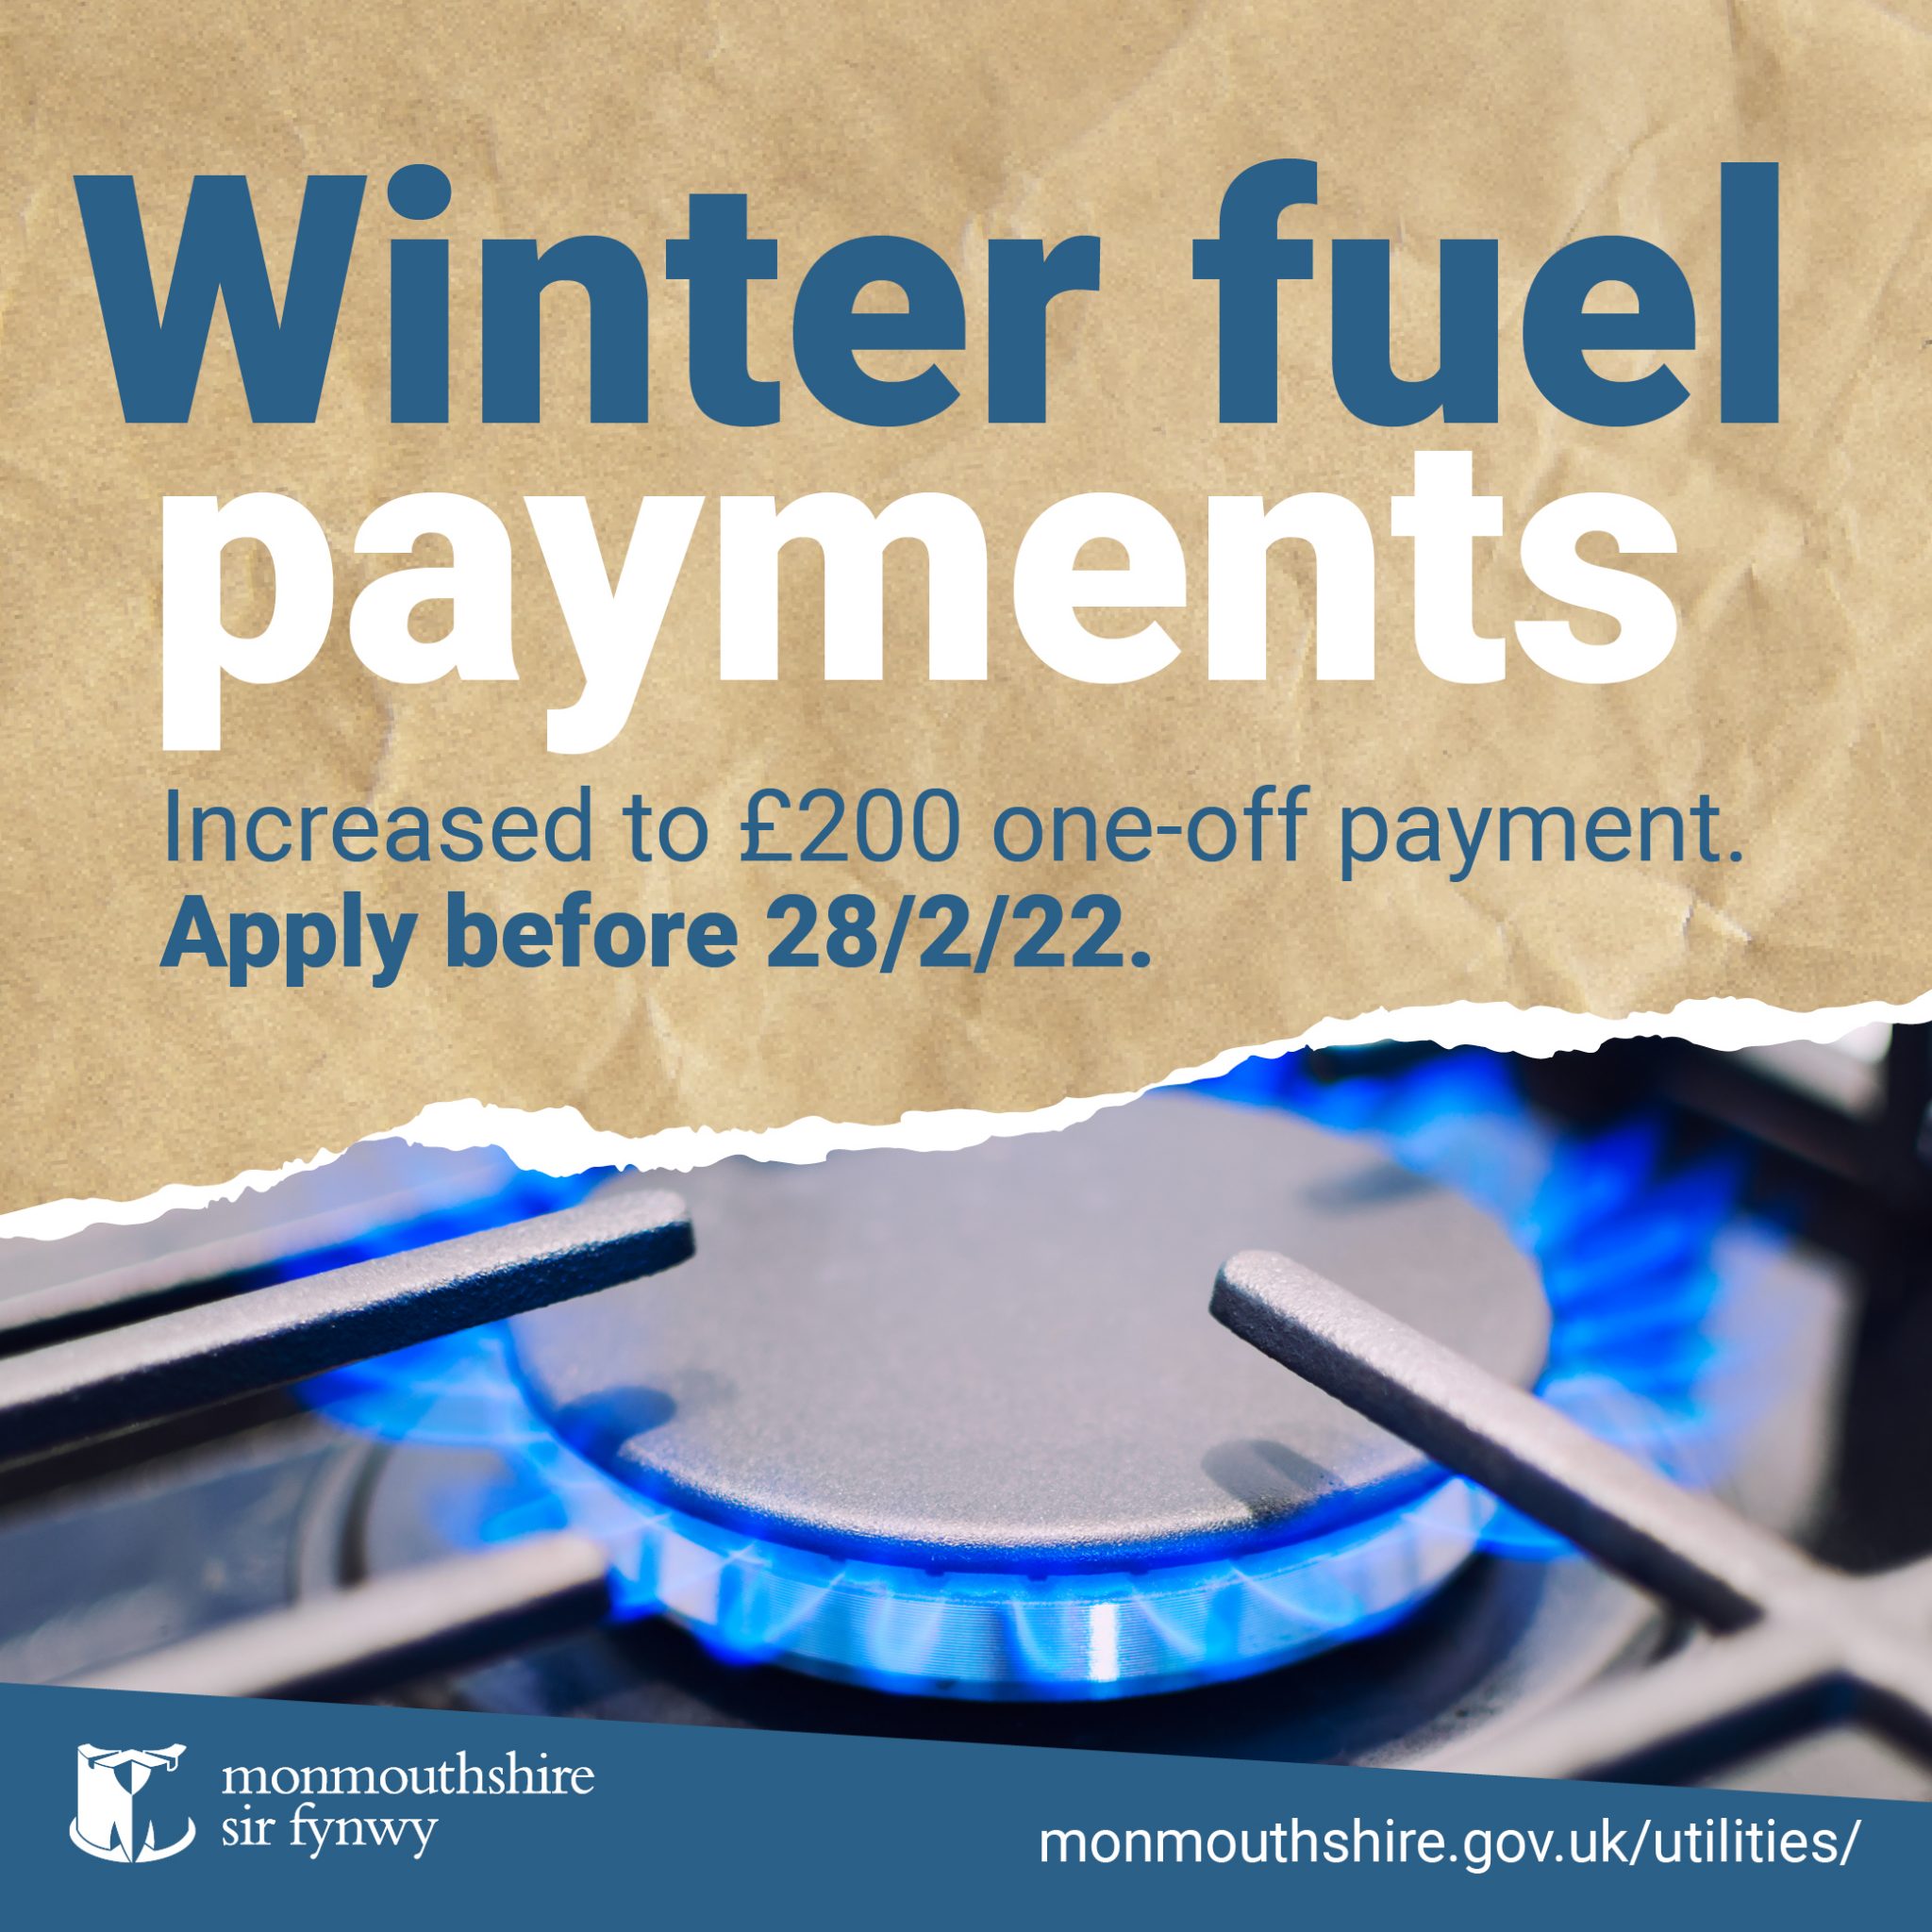 council-issues-an-update-as-annual-winter-fuel-payments-raised-to-200